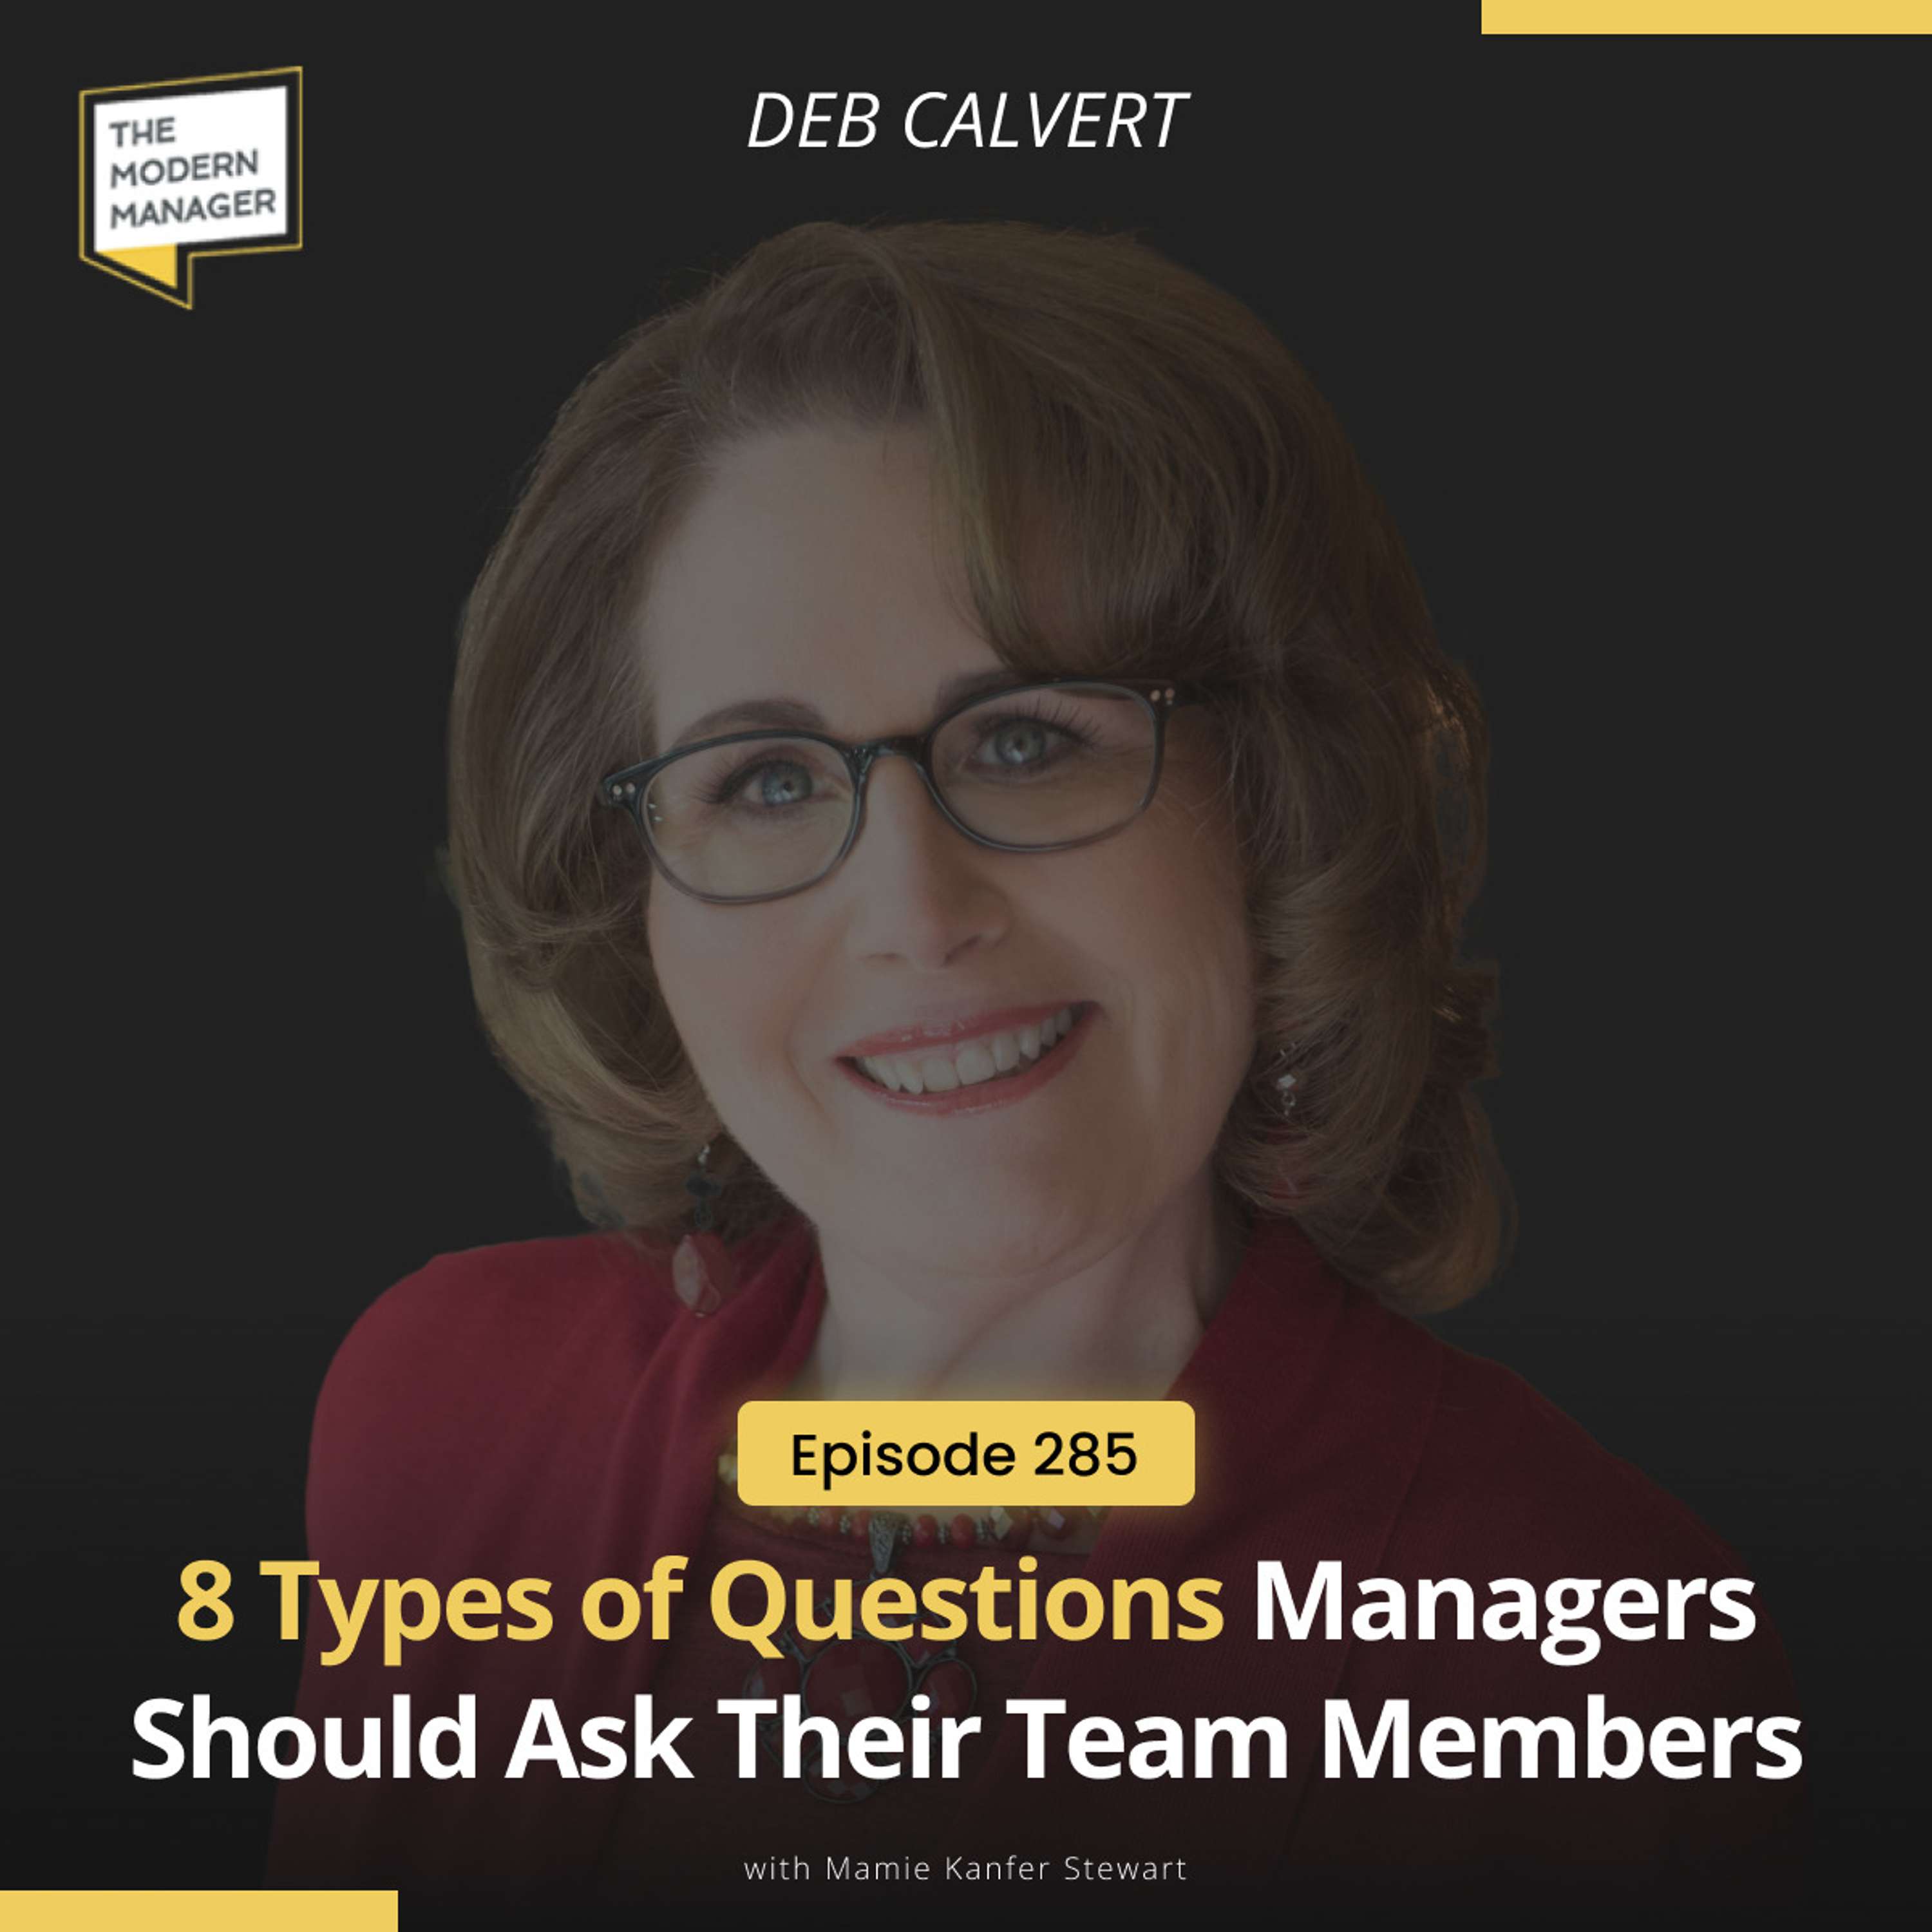 285: 8 Types of Questions Managers Should Ask Their Team Members with Deb Calvert